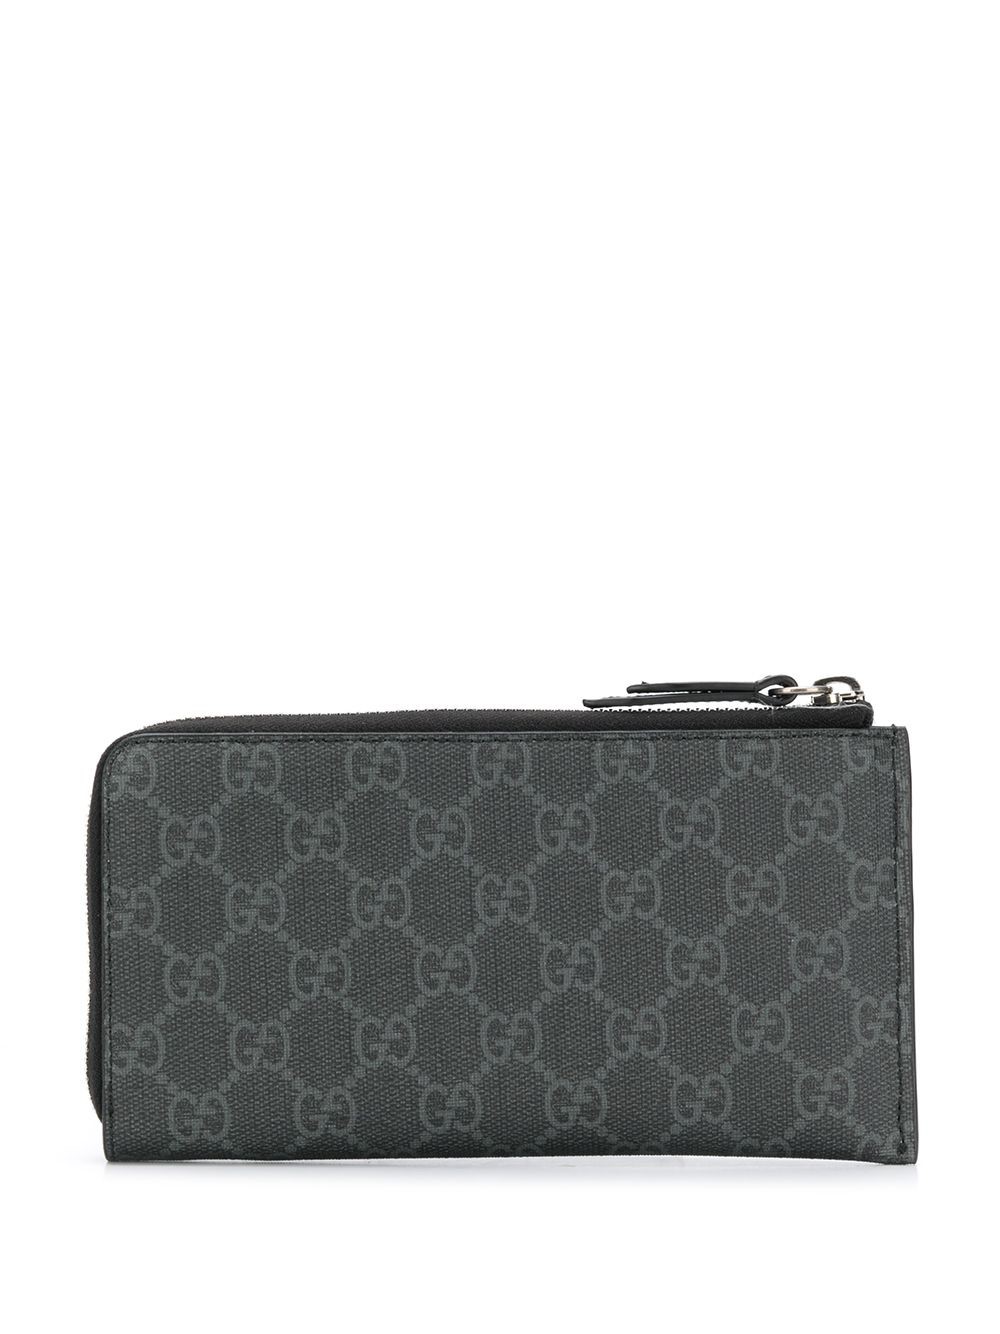 gucci SNAKE WALLET available on www.bagssaleusa.com - 29082